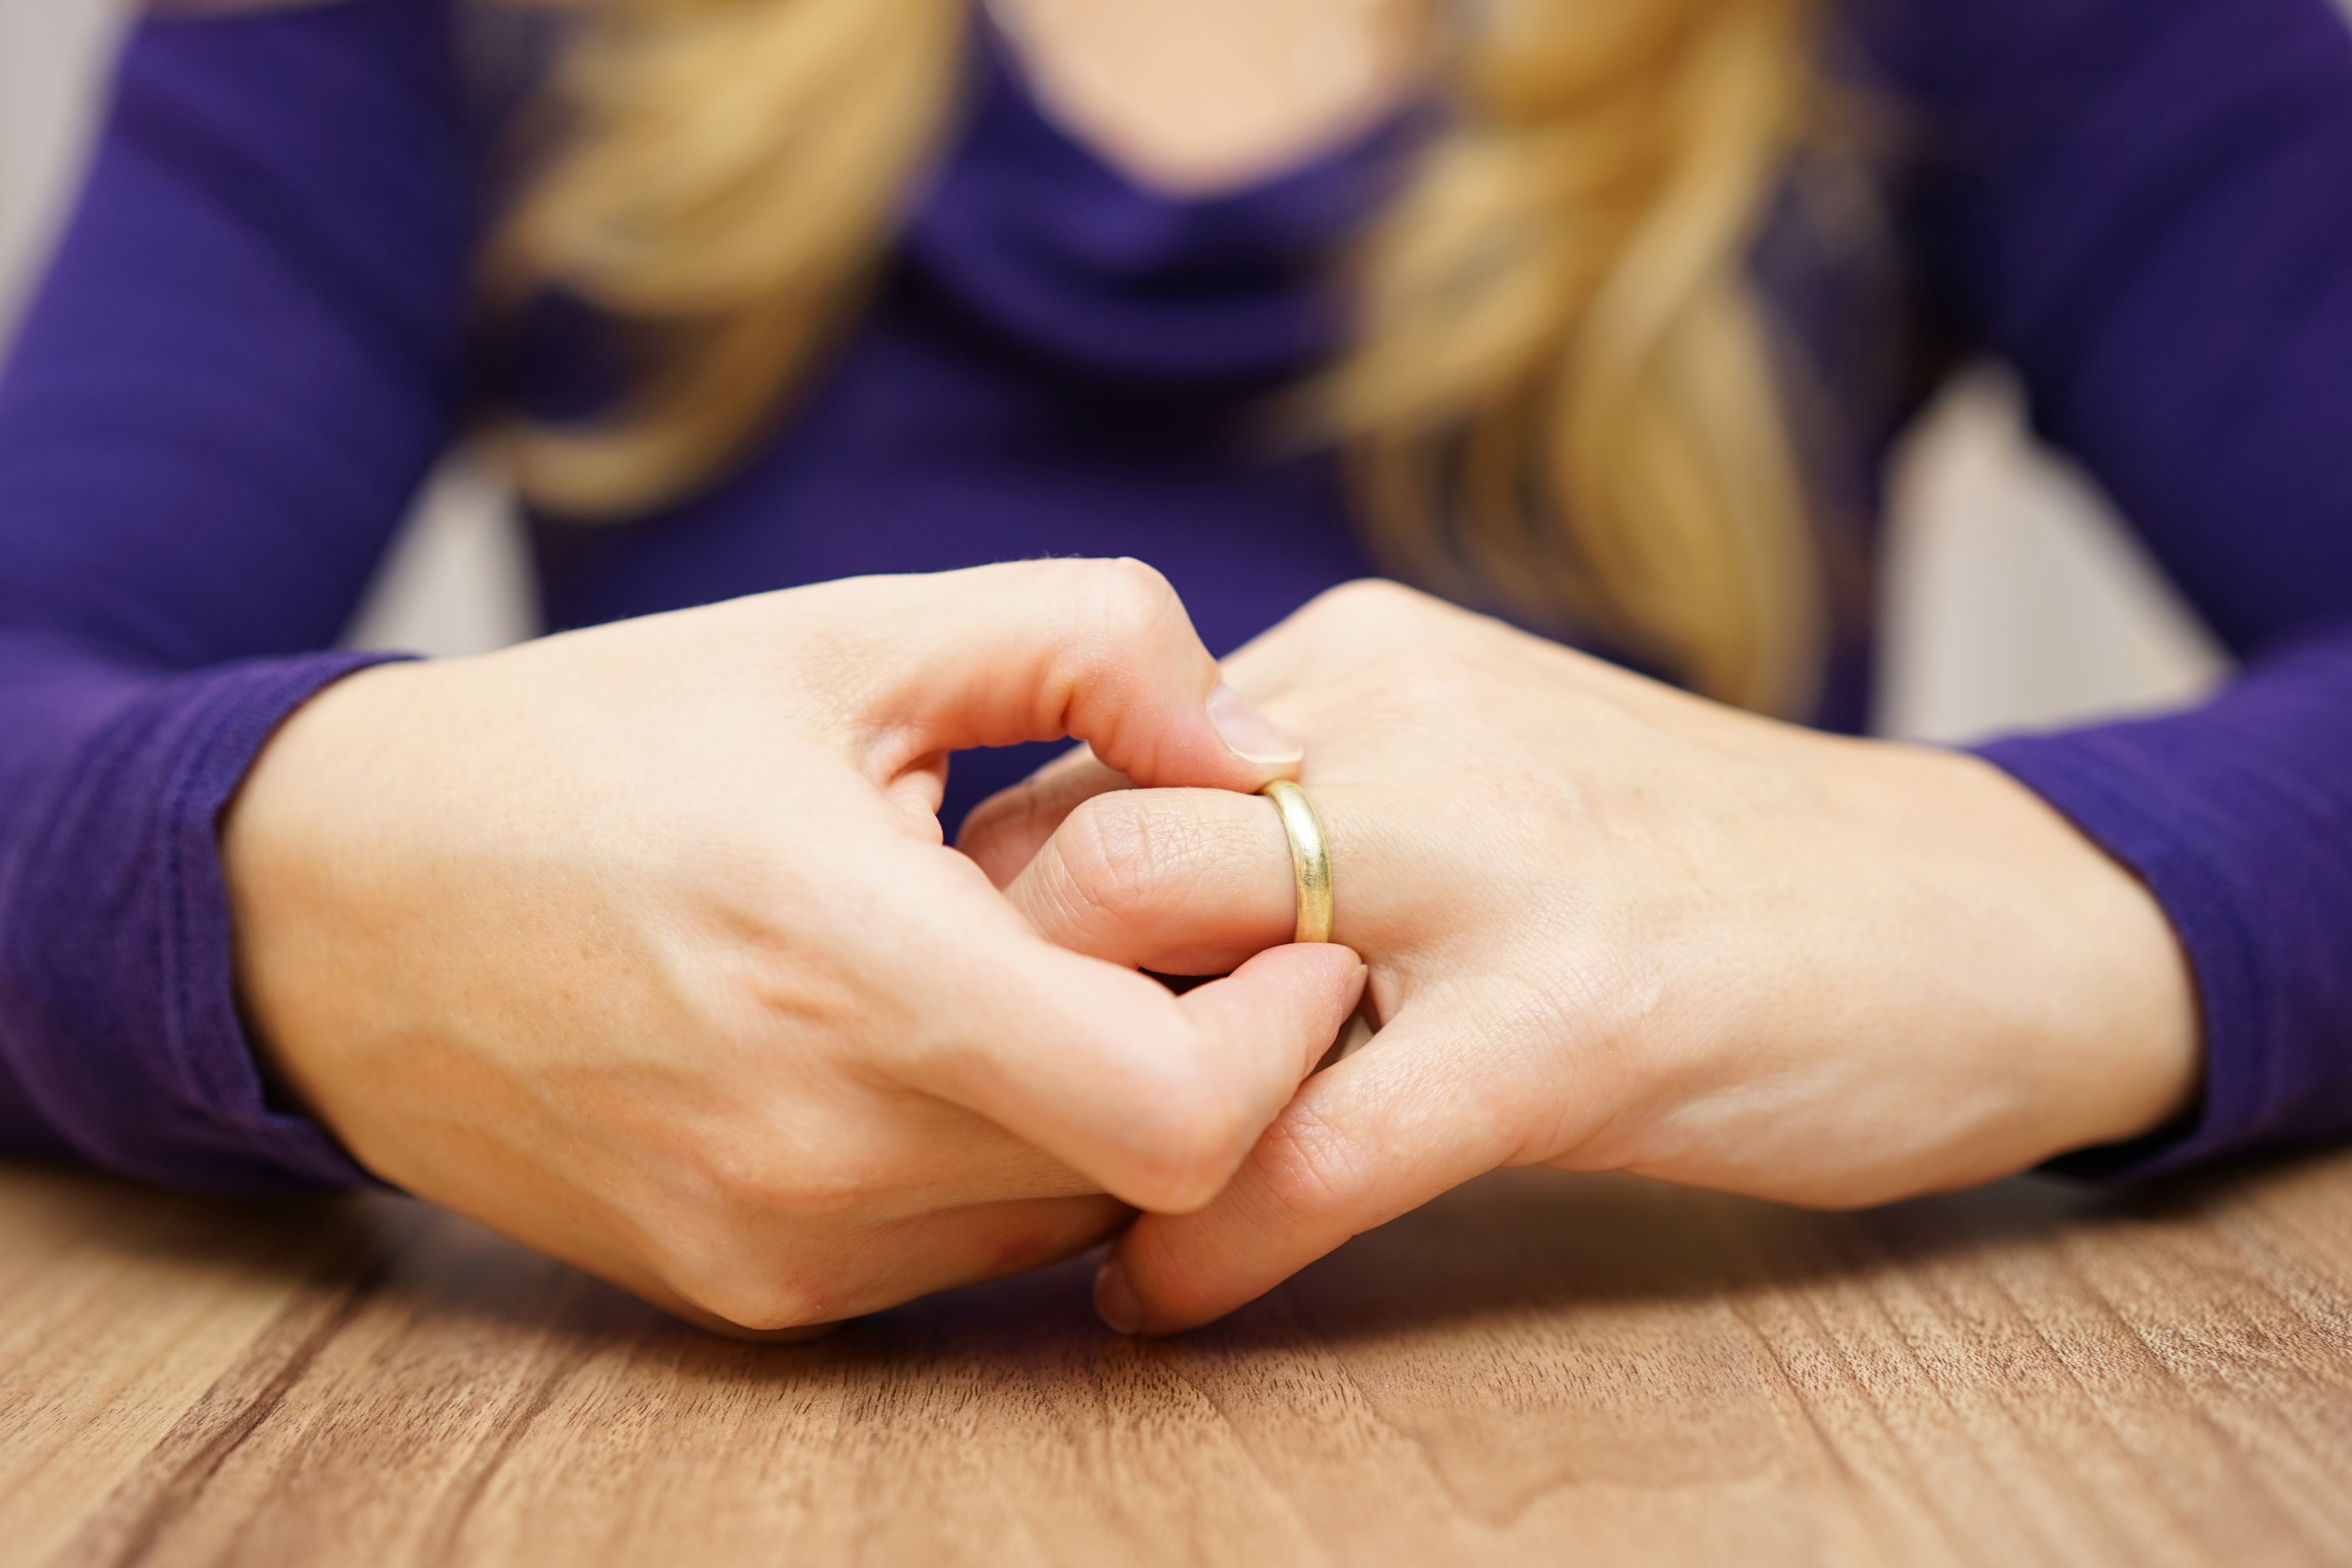 A woman touching her ring finger | Source: Shutterstock